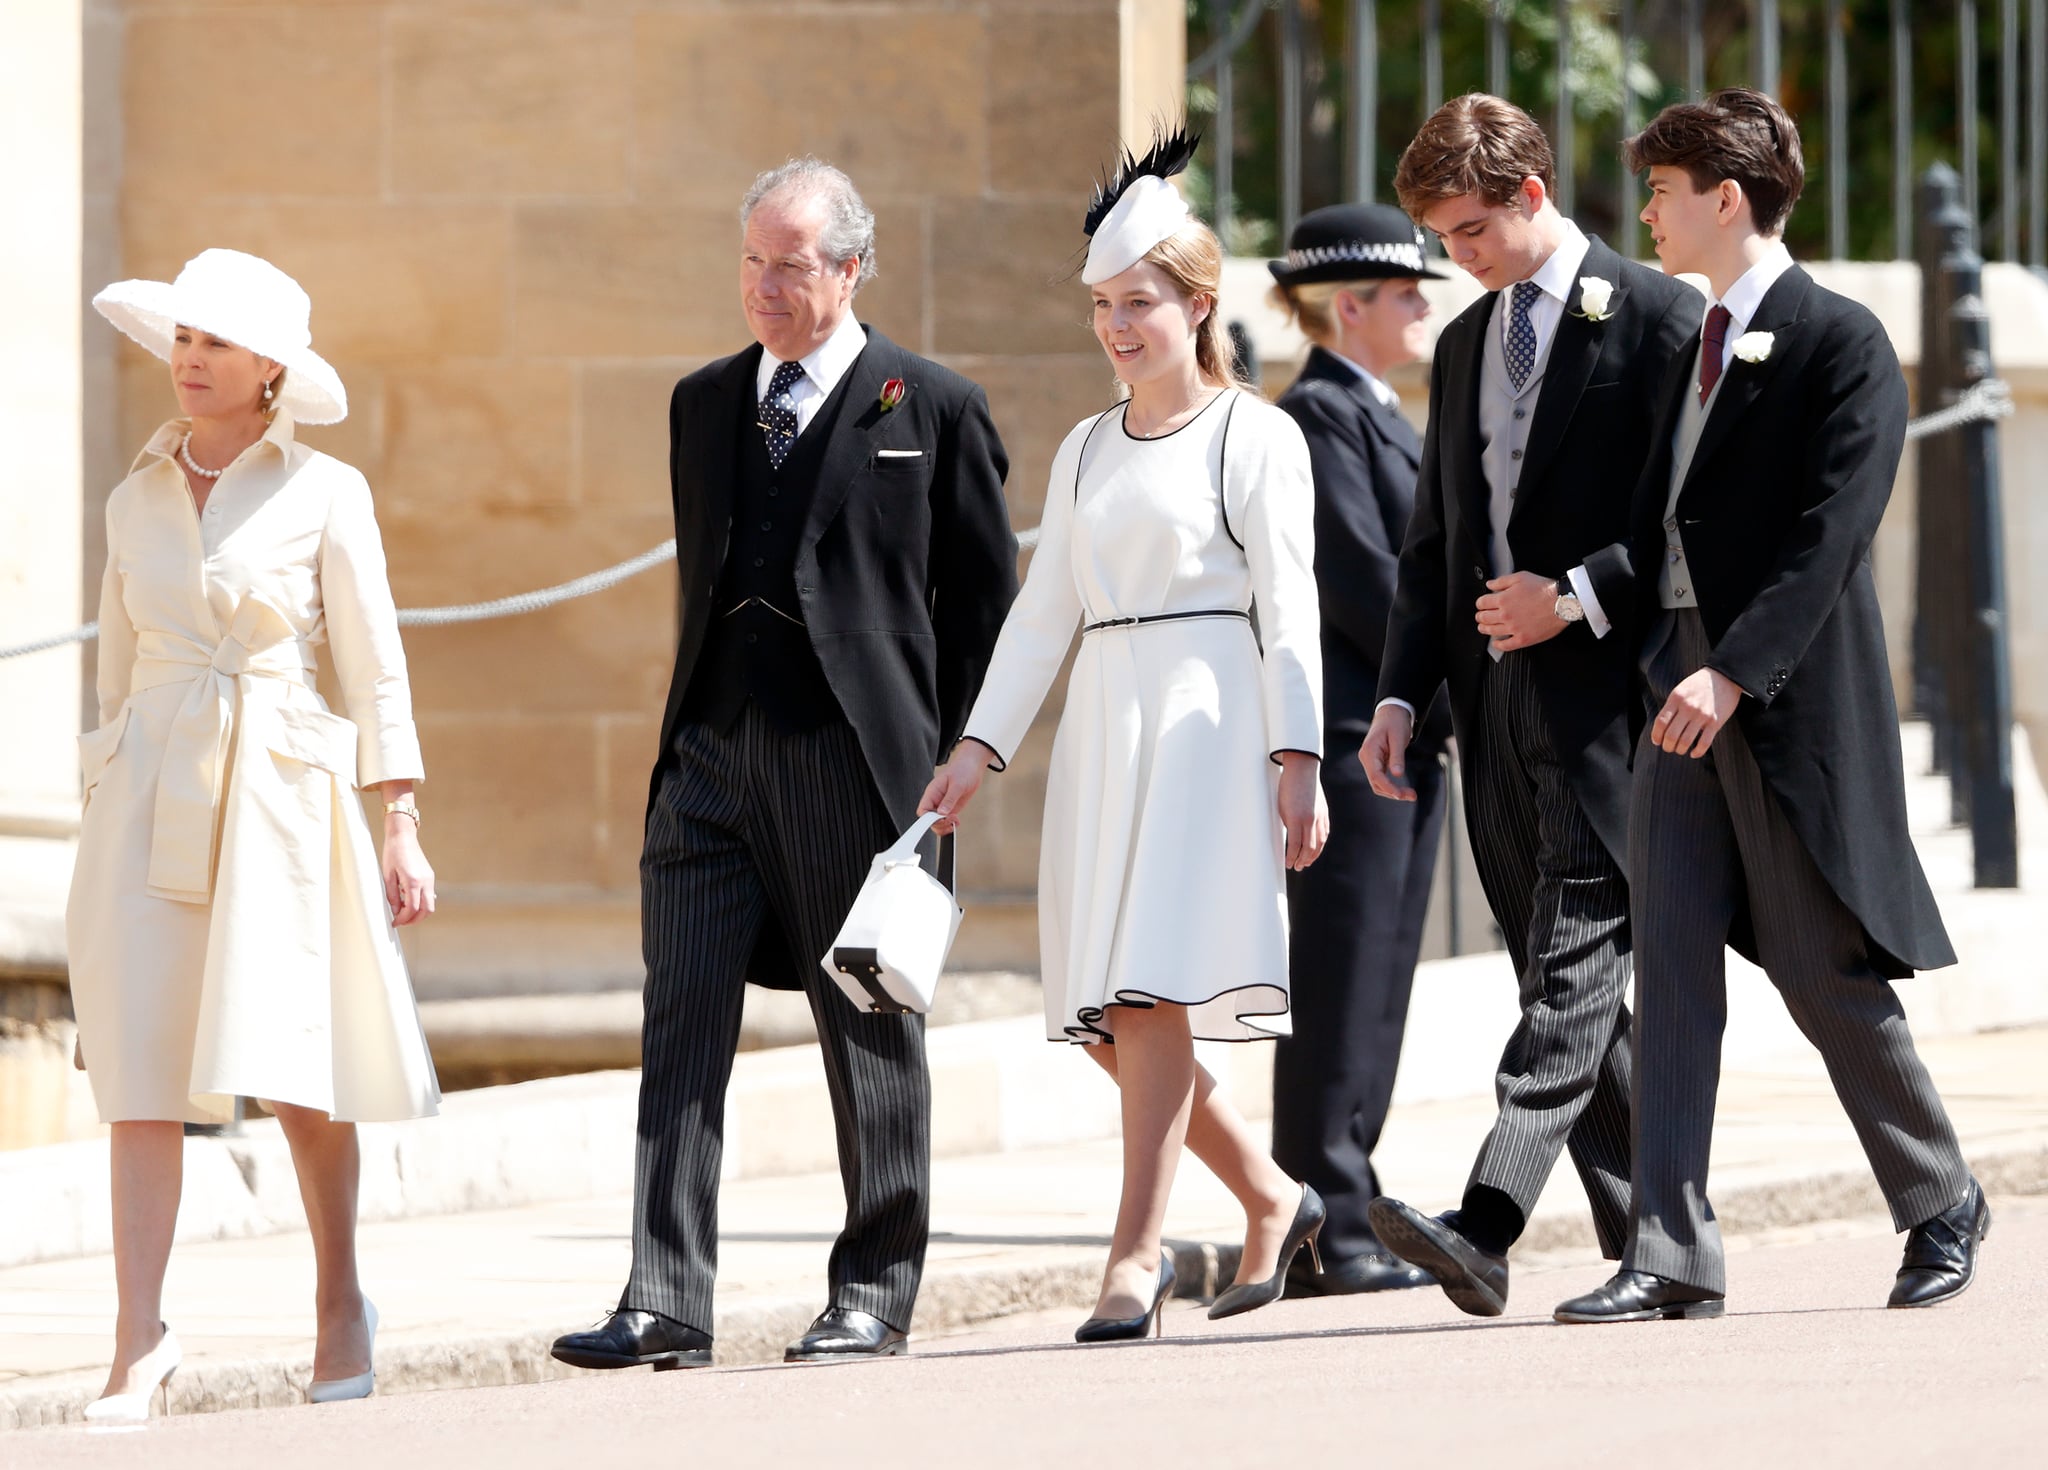 WINDSOR, UNITED KINGDOM - MAY 19: (EMBARGOED FOR PUBLICATION IN UK NEWSPAPERS UNTIL 24 HOURS AFTER CREATE DATE AND TIME) Serena, Countess of Snowdon, David Armstrong-Jones, Earl of Snowdon, Margarita Armstrong-Jones, and Charles Armstrong-Jones, Viscount Linley attend the wedding of Prince Harry to Ms Meghan Markle at St George's Chapel, Windsor Castle on May 19, 2018 in Windsor, England. Prince Henry Charles Albert David of Wales marries Ms. Meghan Markle in a service at St George's Chapel inside the grounds of Windsor Castle. Among the guests were 2200 members of the public, the royal family and Ms. Markle's Mother Doria Ragland. (Photo by Max Mumby/Indigo/Getty Images)